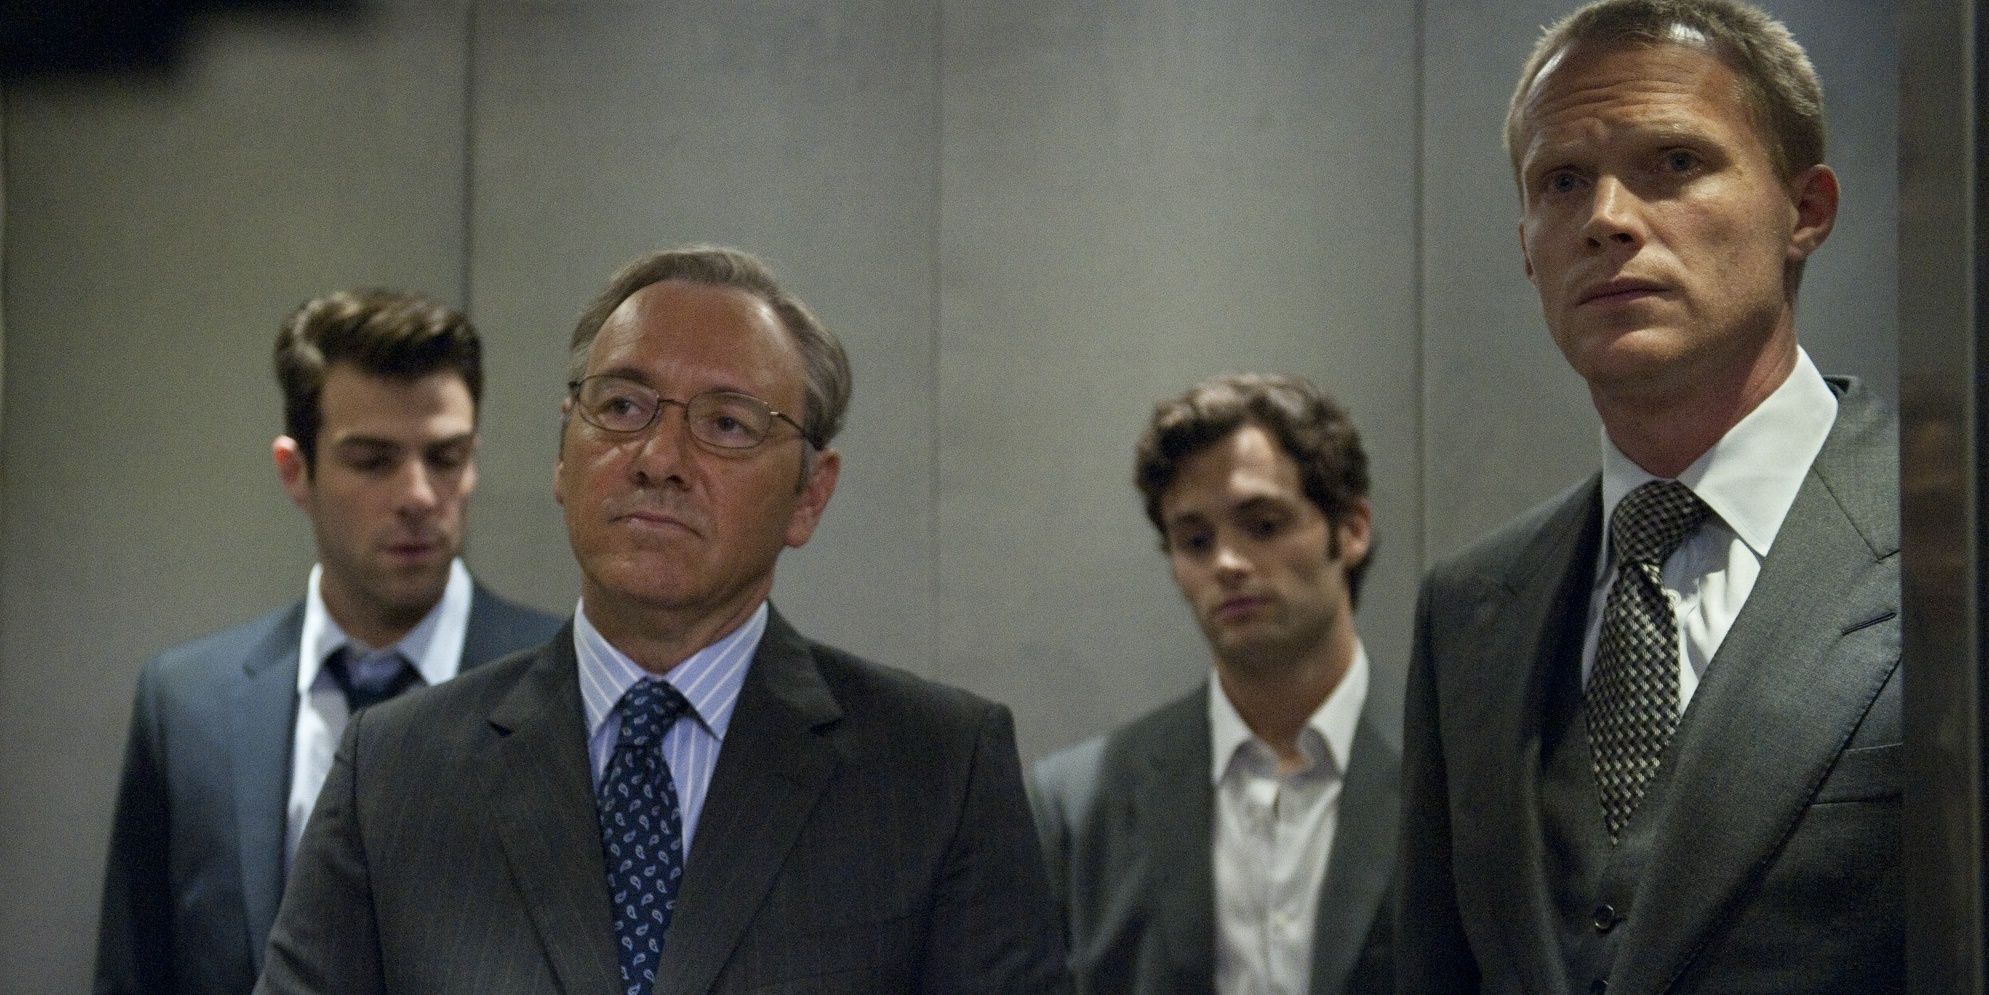 Kevin Spacey, Zachary Quinto, Paul Bettany in an elevator in Margin Call